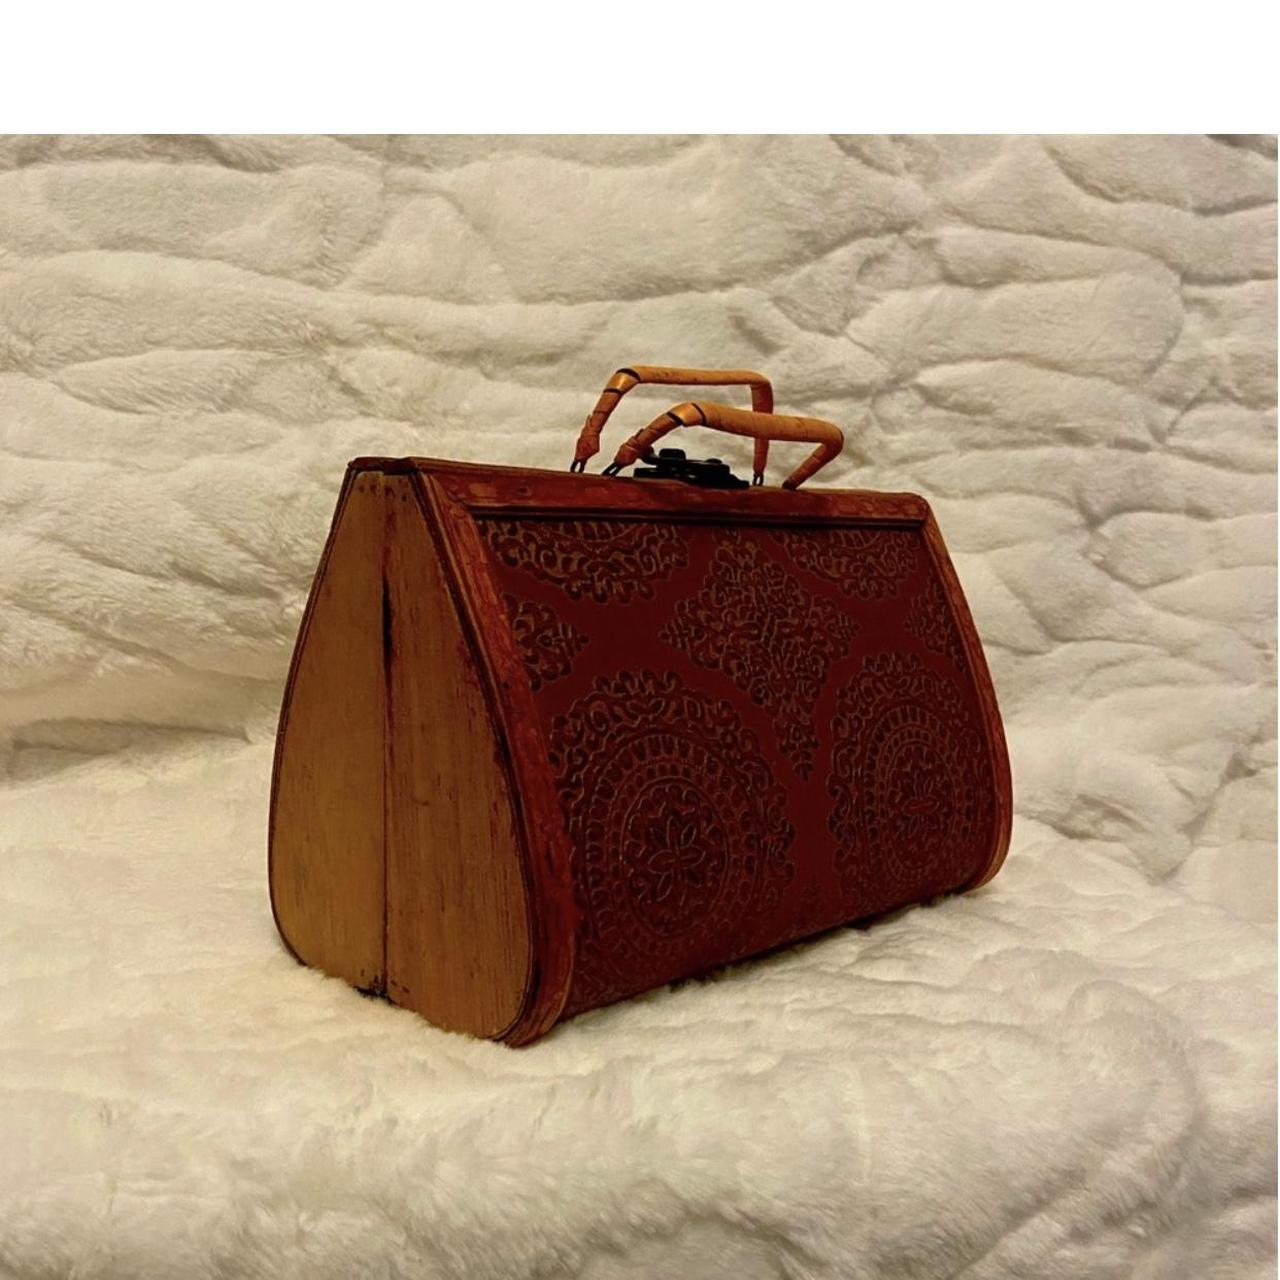 Vintage 1940s Box Bag Purse 1940s Wood Rattan and Willow 